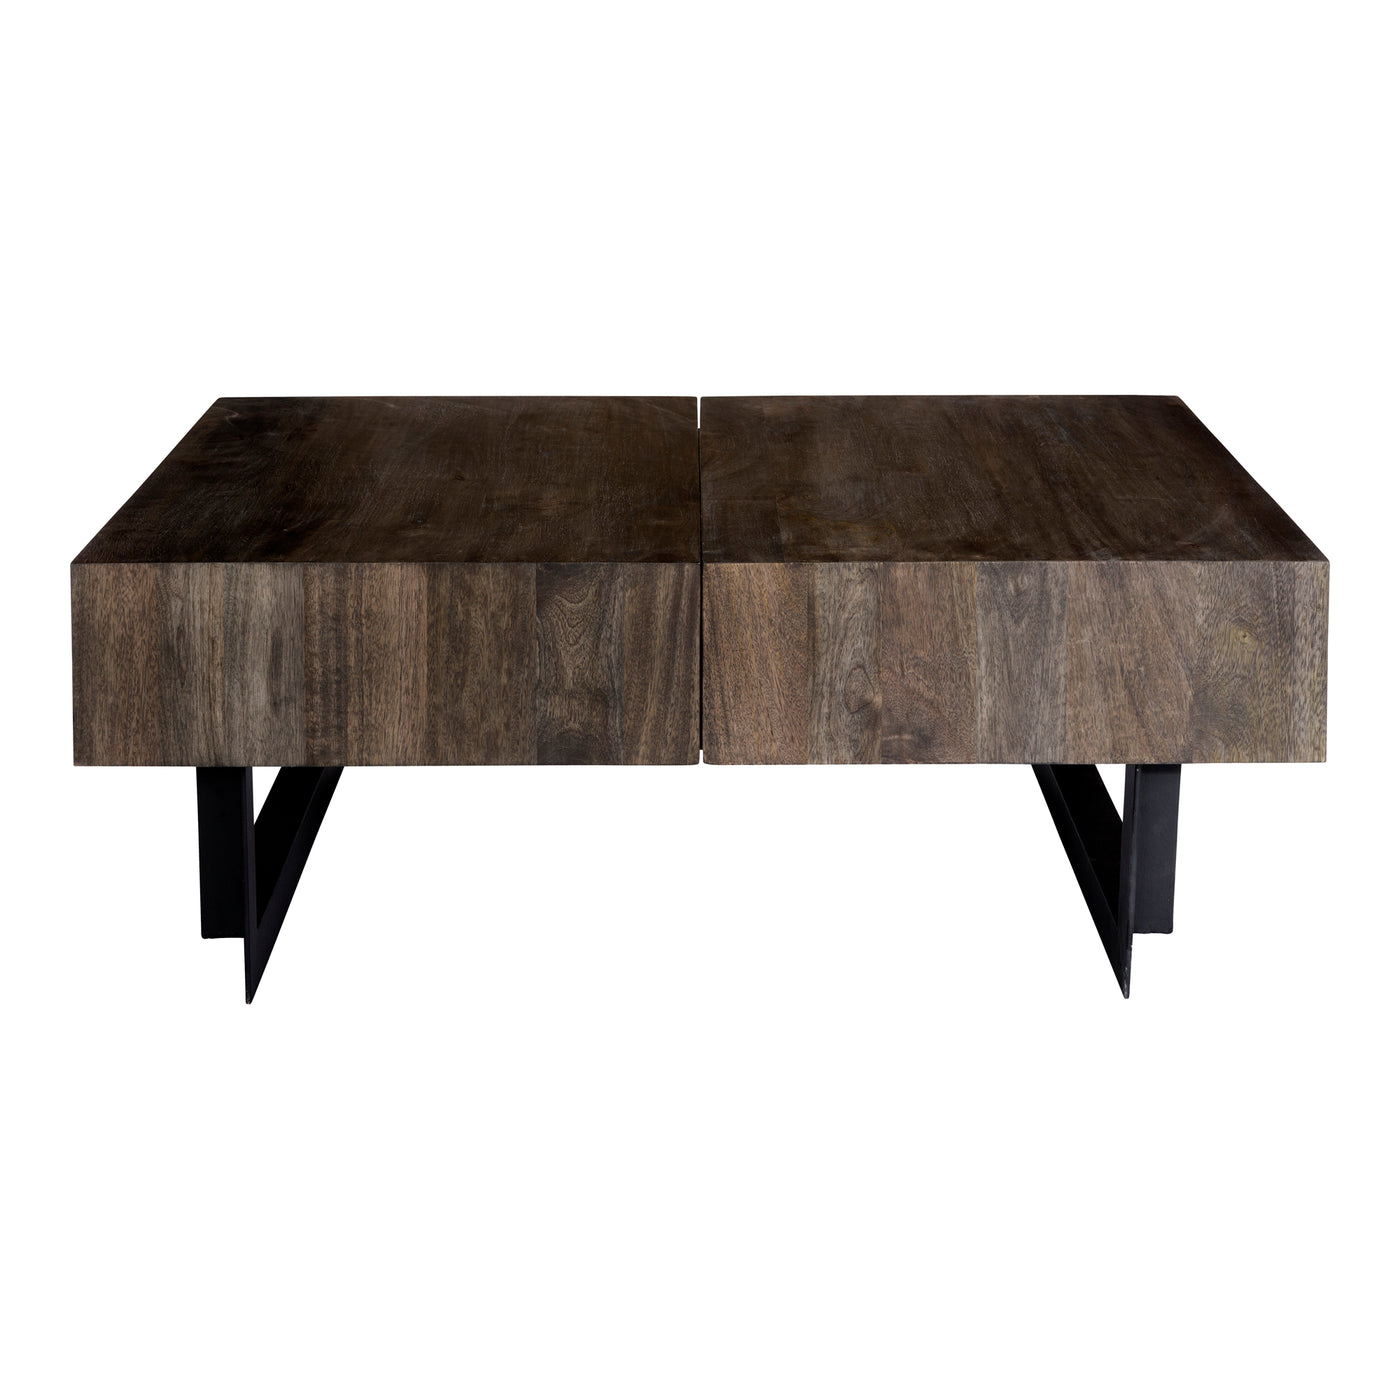 The Tiburon Storage Coffee Table is the perfect piece for the lack-of-storage living space. Its tabletop is constructed wi...